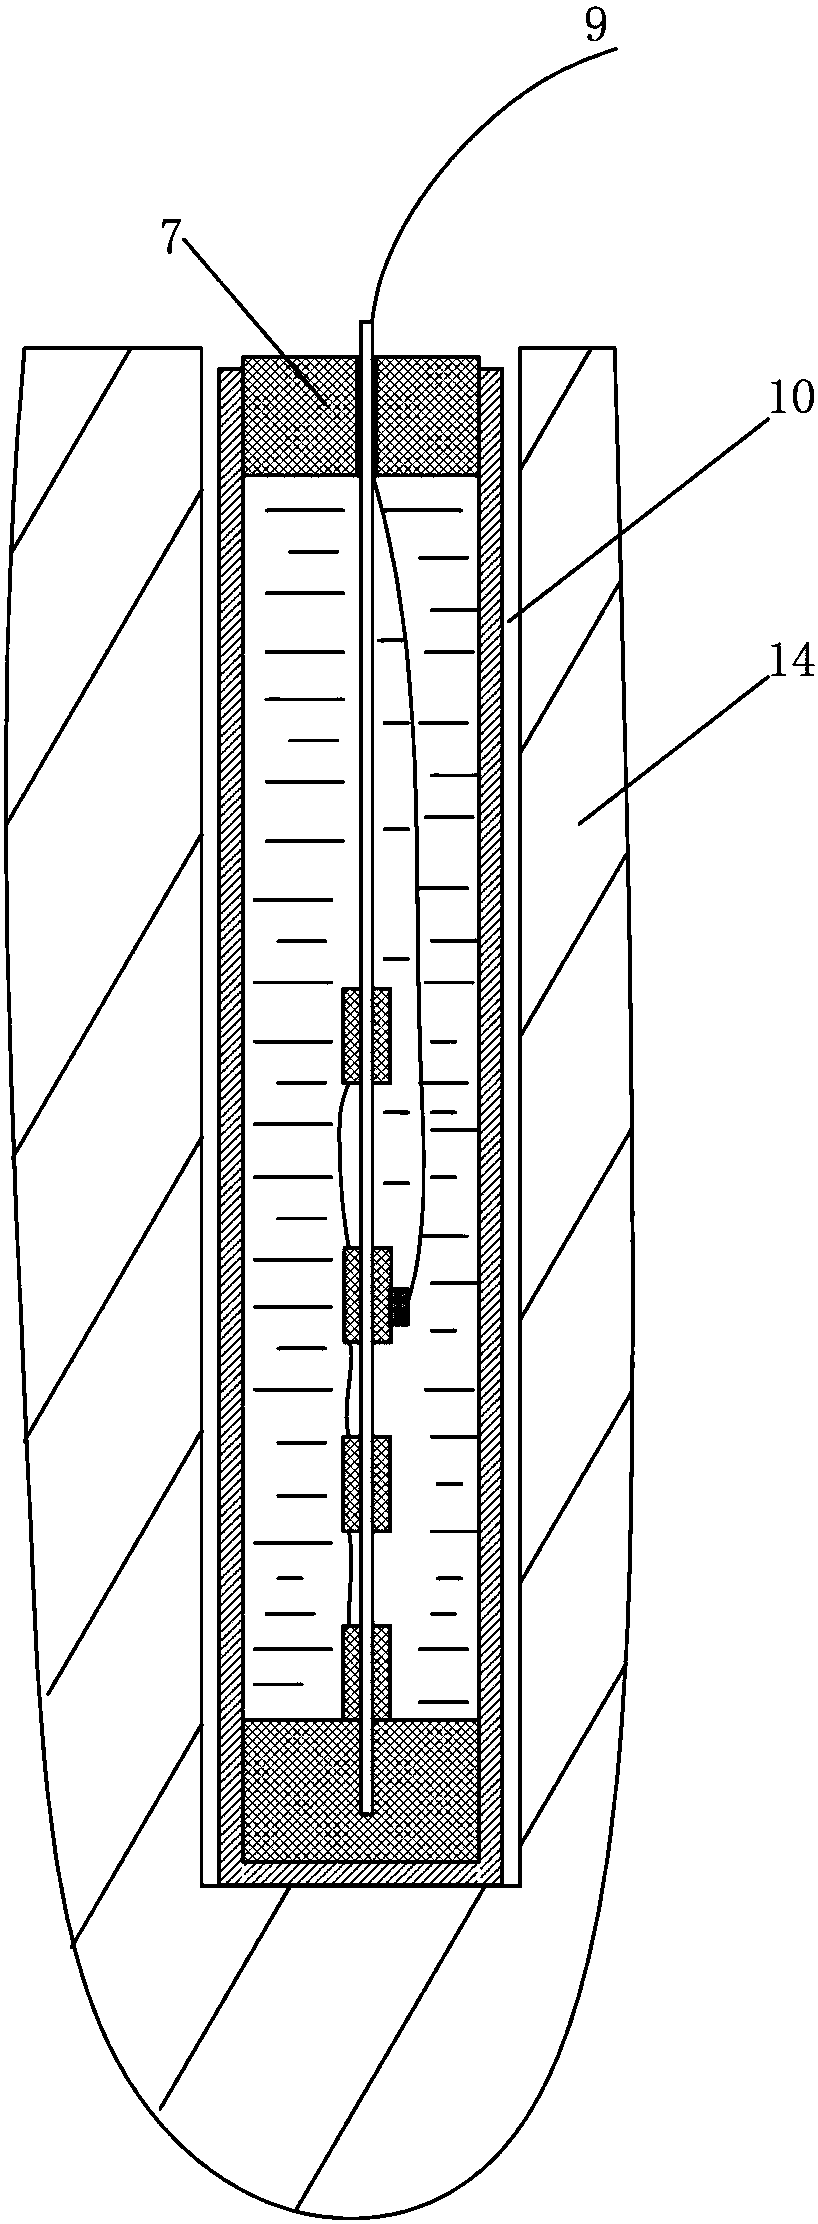 Pre-crack blasting hole charging device for foundation pit excavation